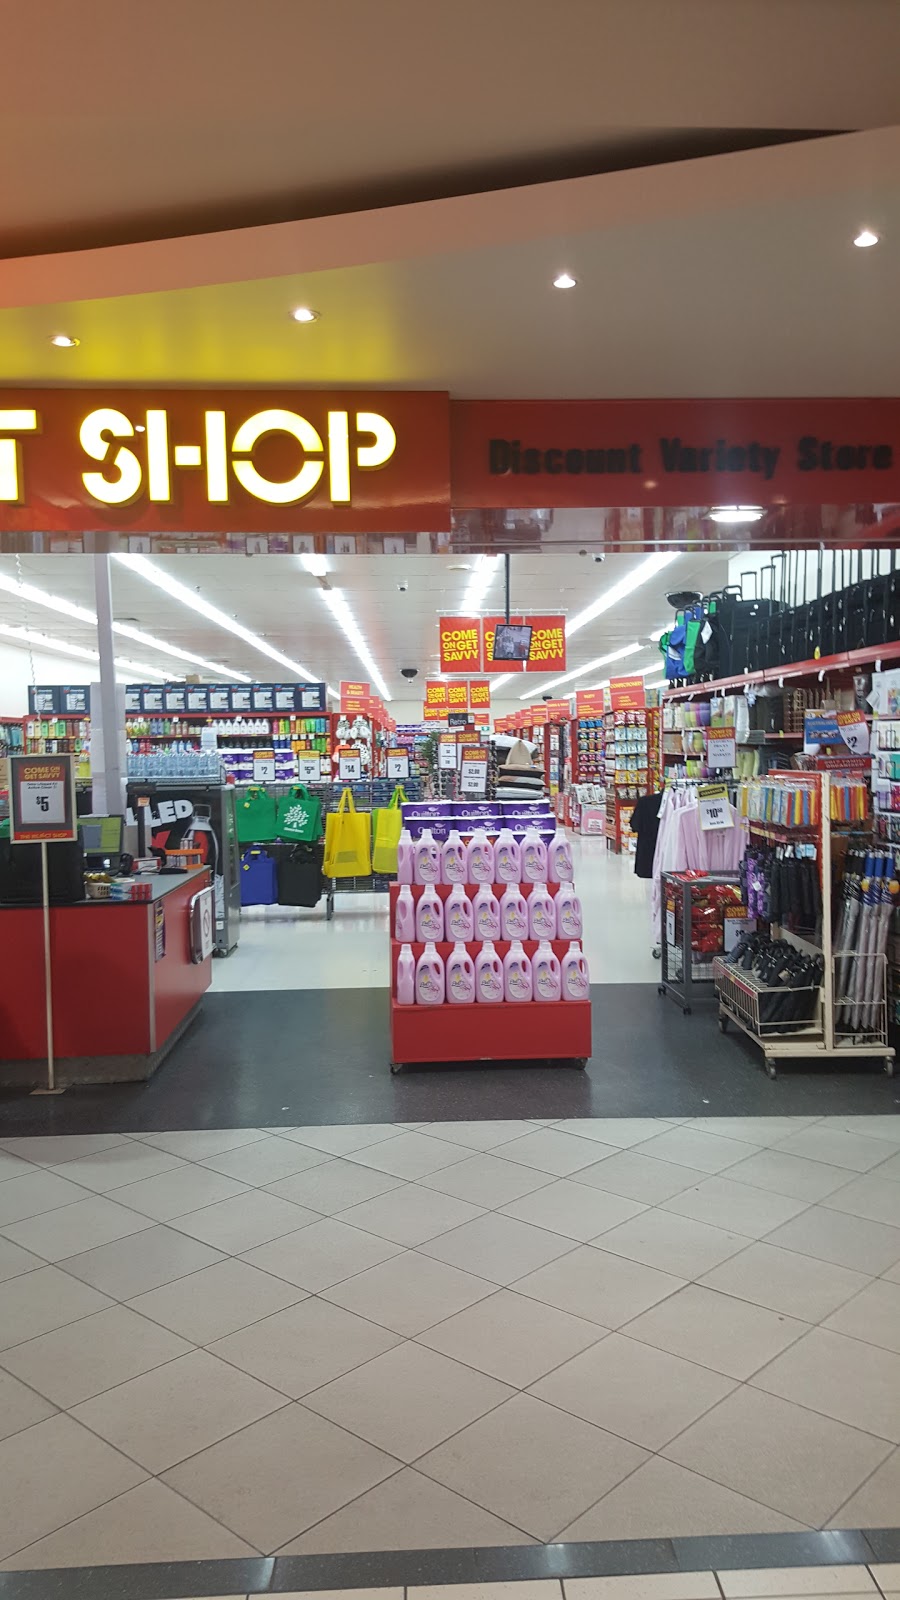 The Reject Shop Morwell | department store | Shop 54, Mid Valley Shopping Centre, Corner Centre Valley Road and Princes Drive Shop 54 Mid Valley Shopping Centre, Morwell VIC 3840, Australia | 0351336798 OR +61 3 5133 6798